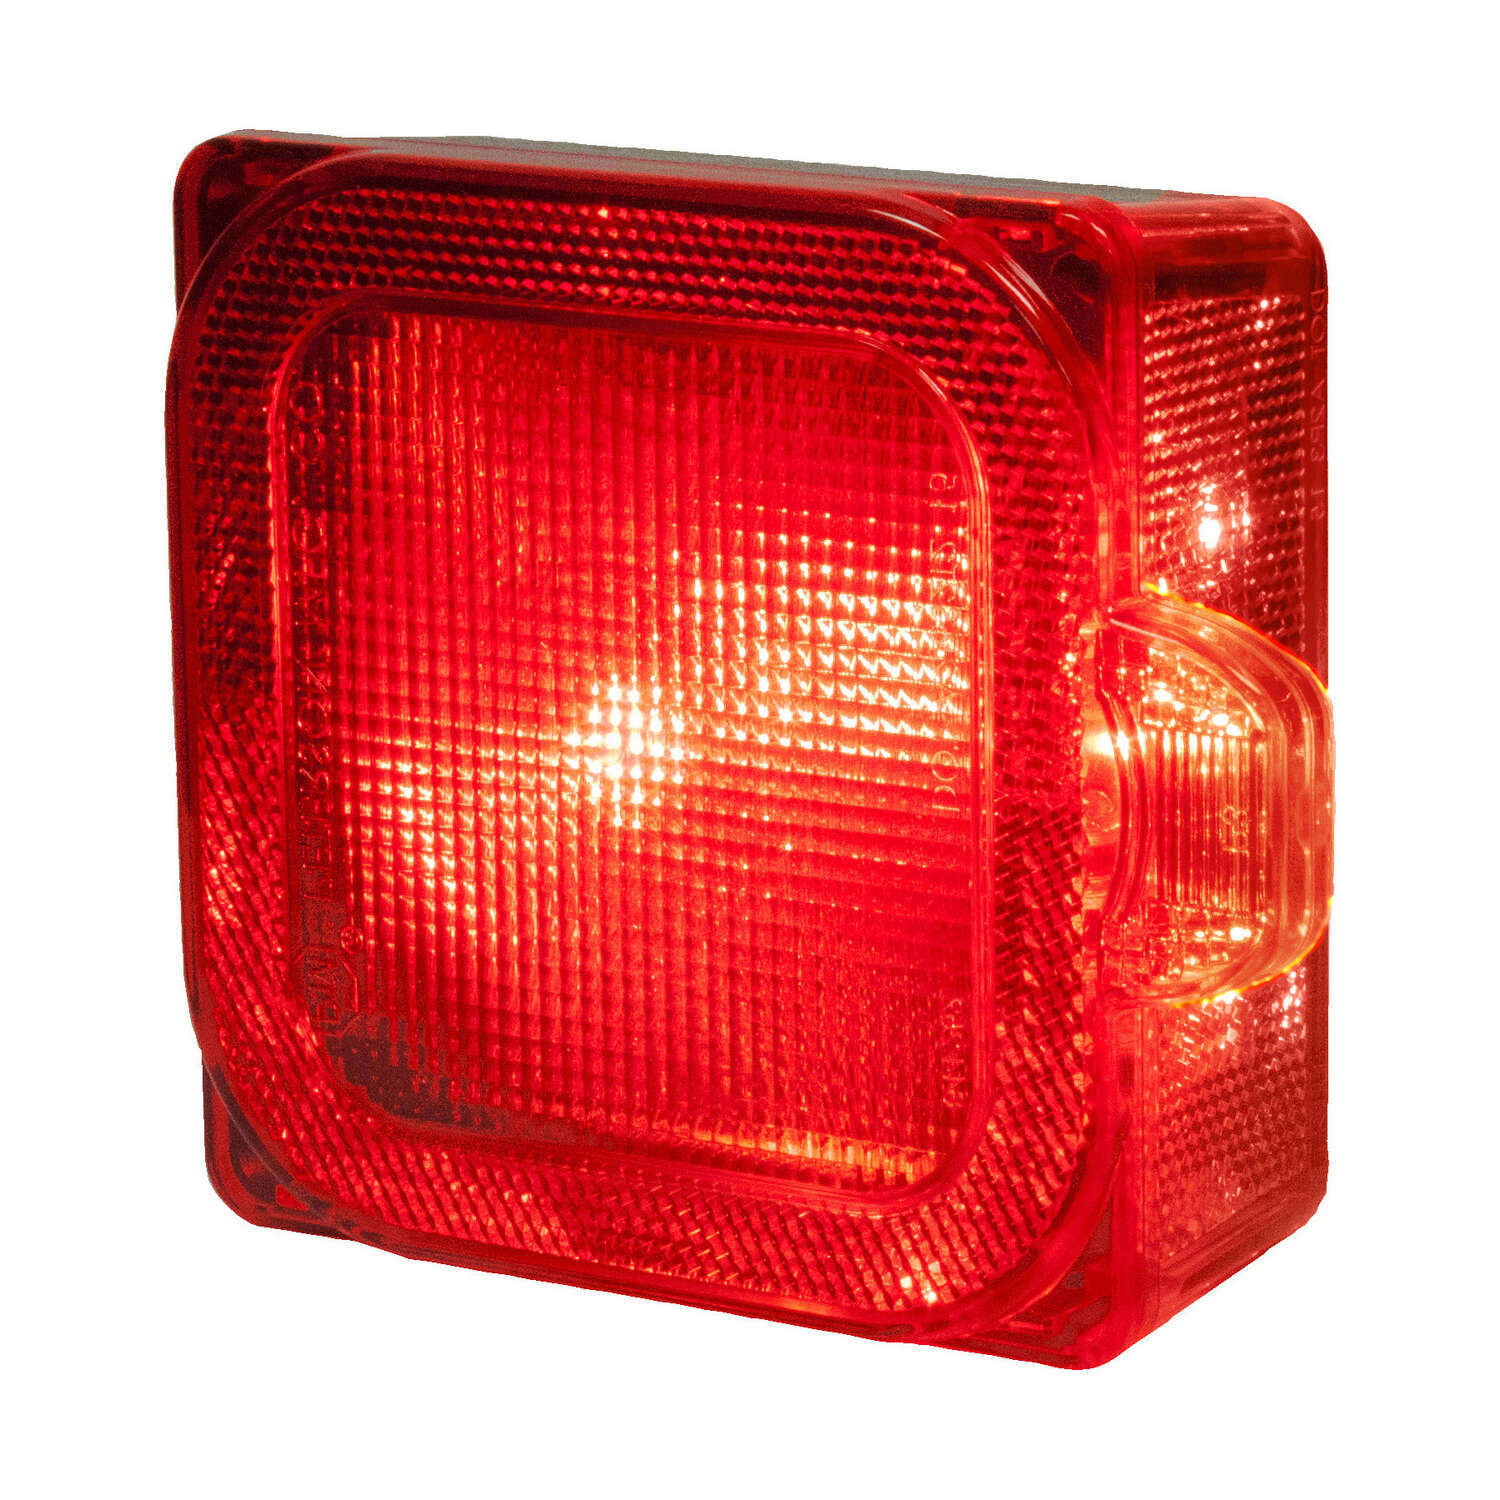 Peterson Manufacturing V25911 Red Stop and Tail Light 